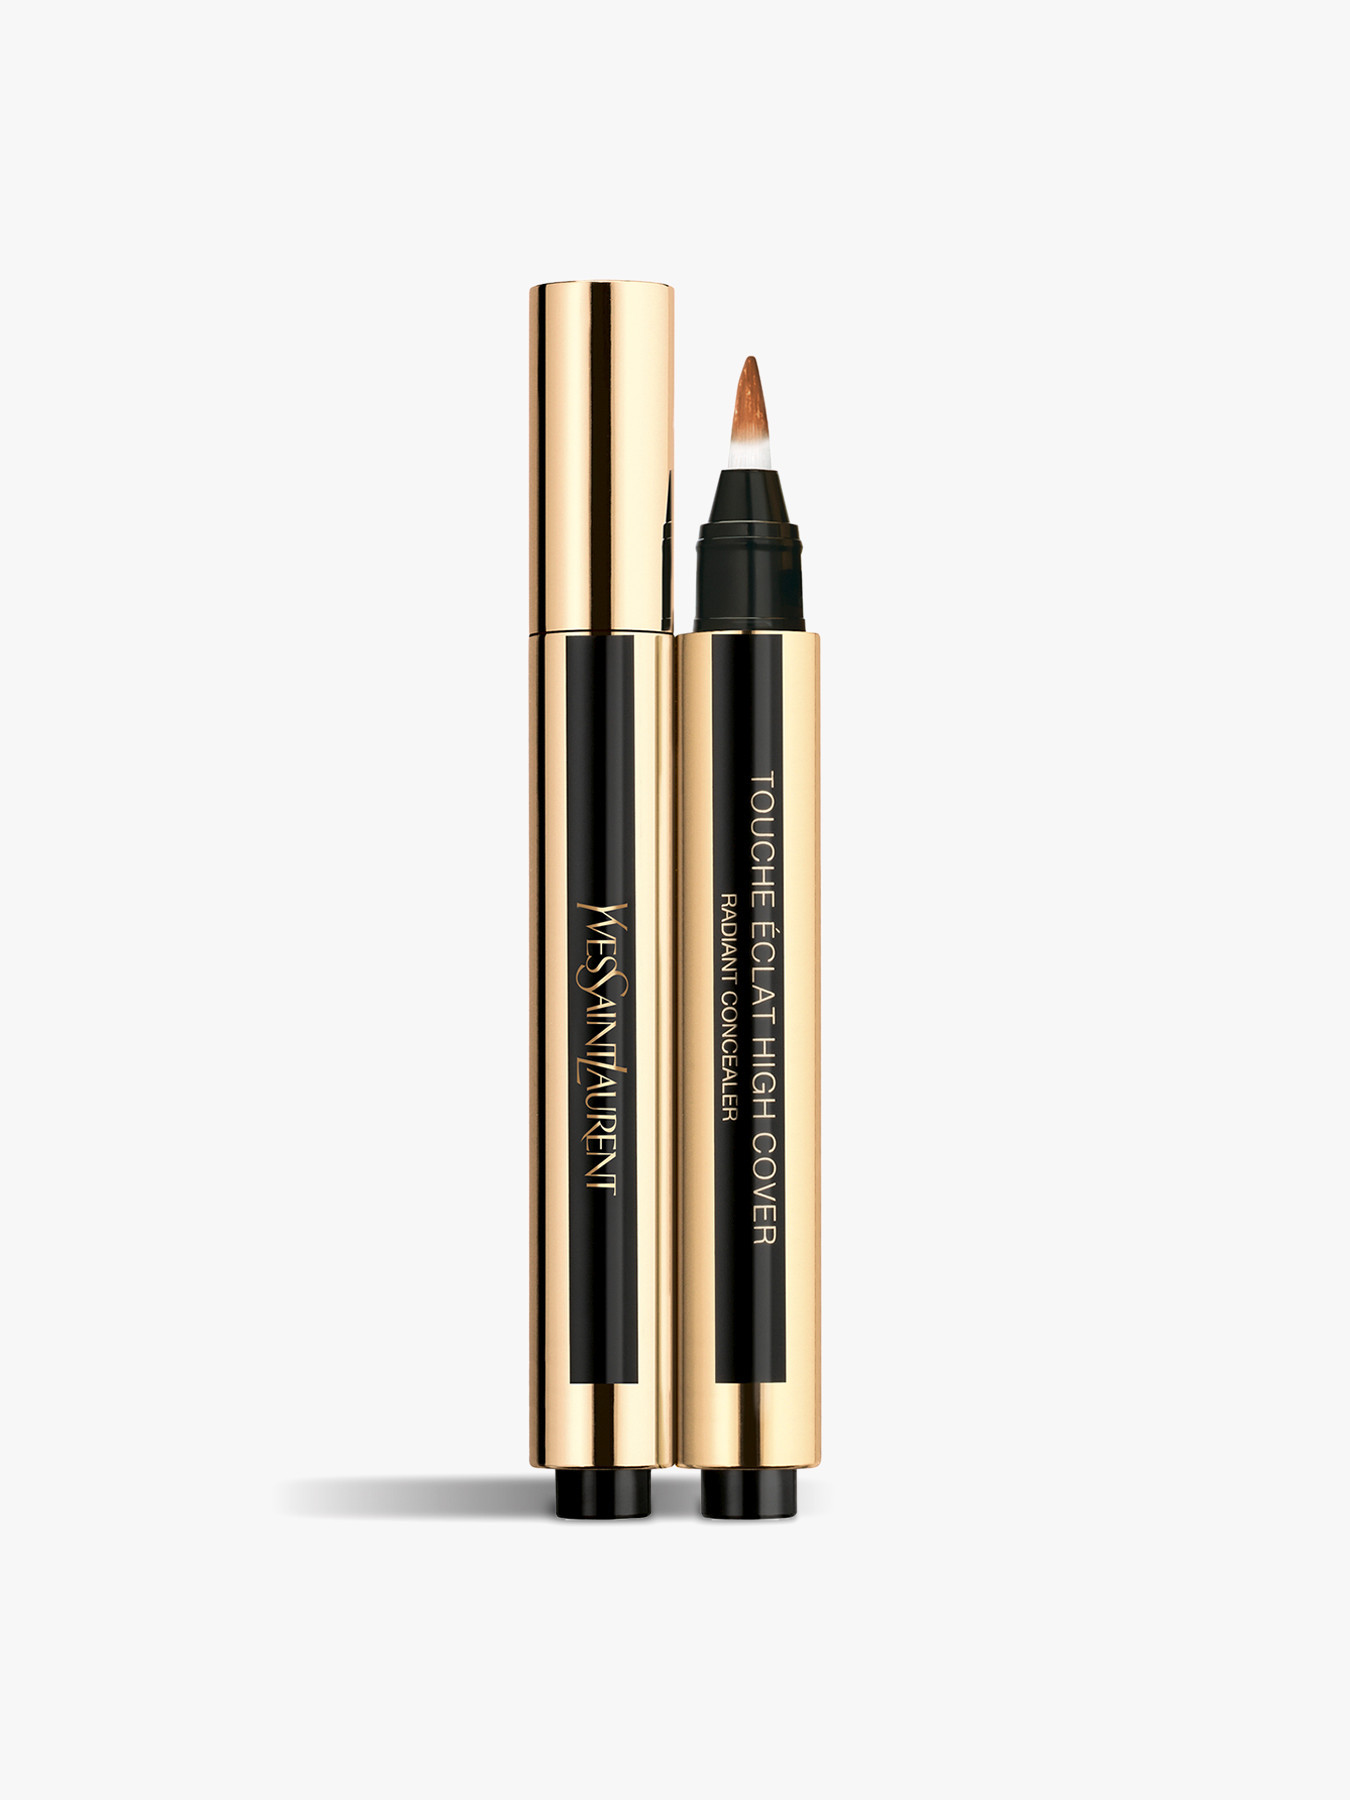 Ysl Touche Éclat High Cover Concealer 4 Sand